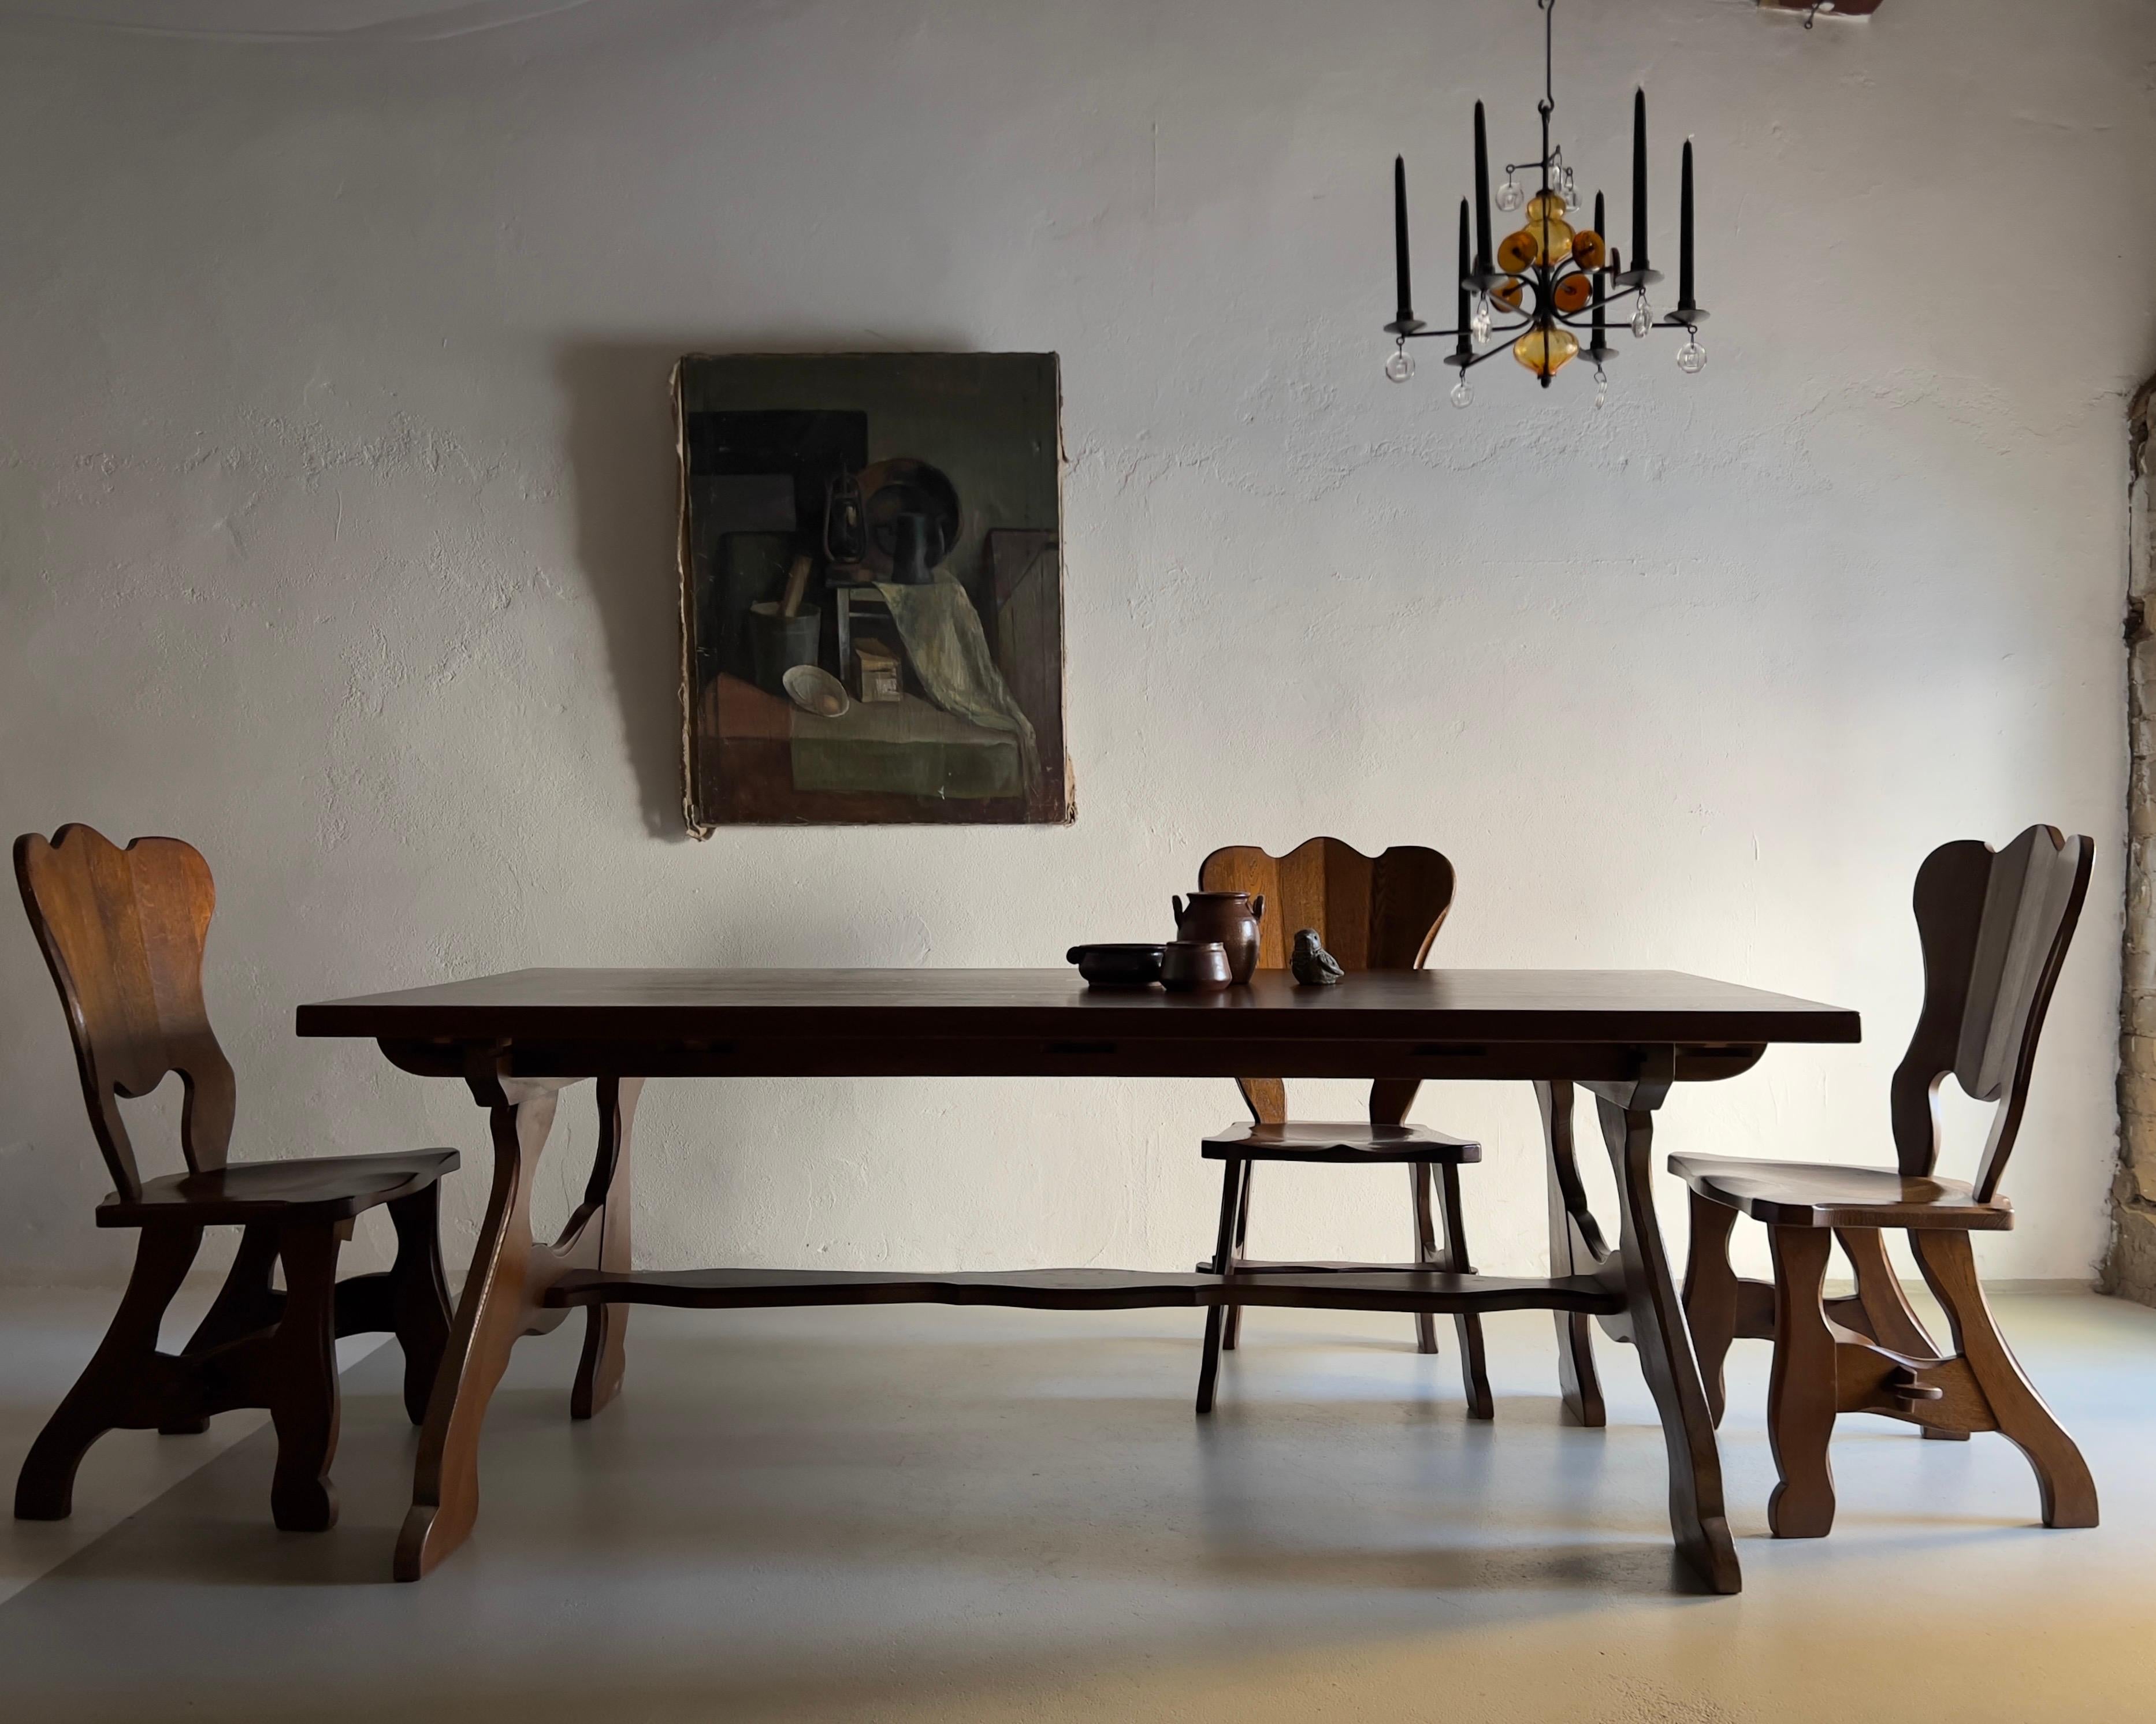 Dark solid oak dining table with a set of six matching chairs.

Dimensions:
Table (may be fully disassembled): H(table/tabletop) 74/4 cm, W 200 cm, D 84 cm
Chairs: H 98 cm, H(seat) 45 cm, W 49 cm, D 49 cm